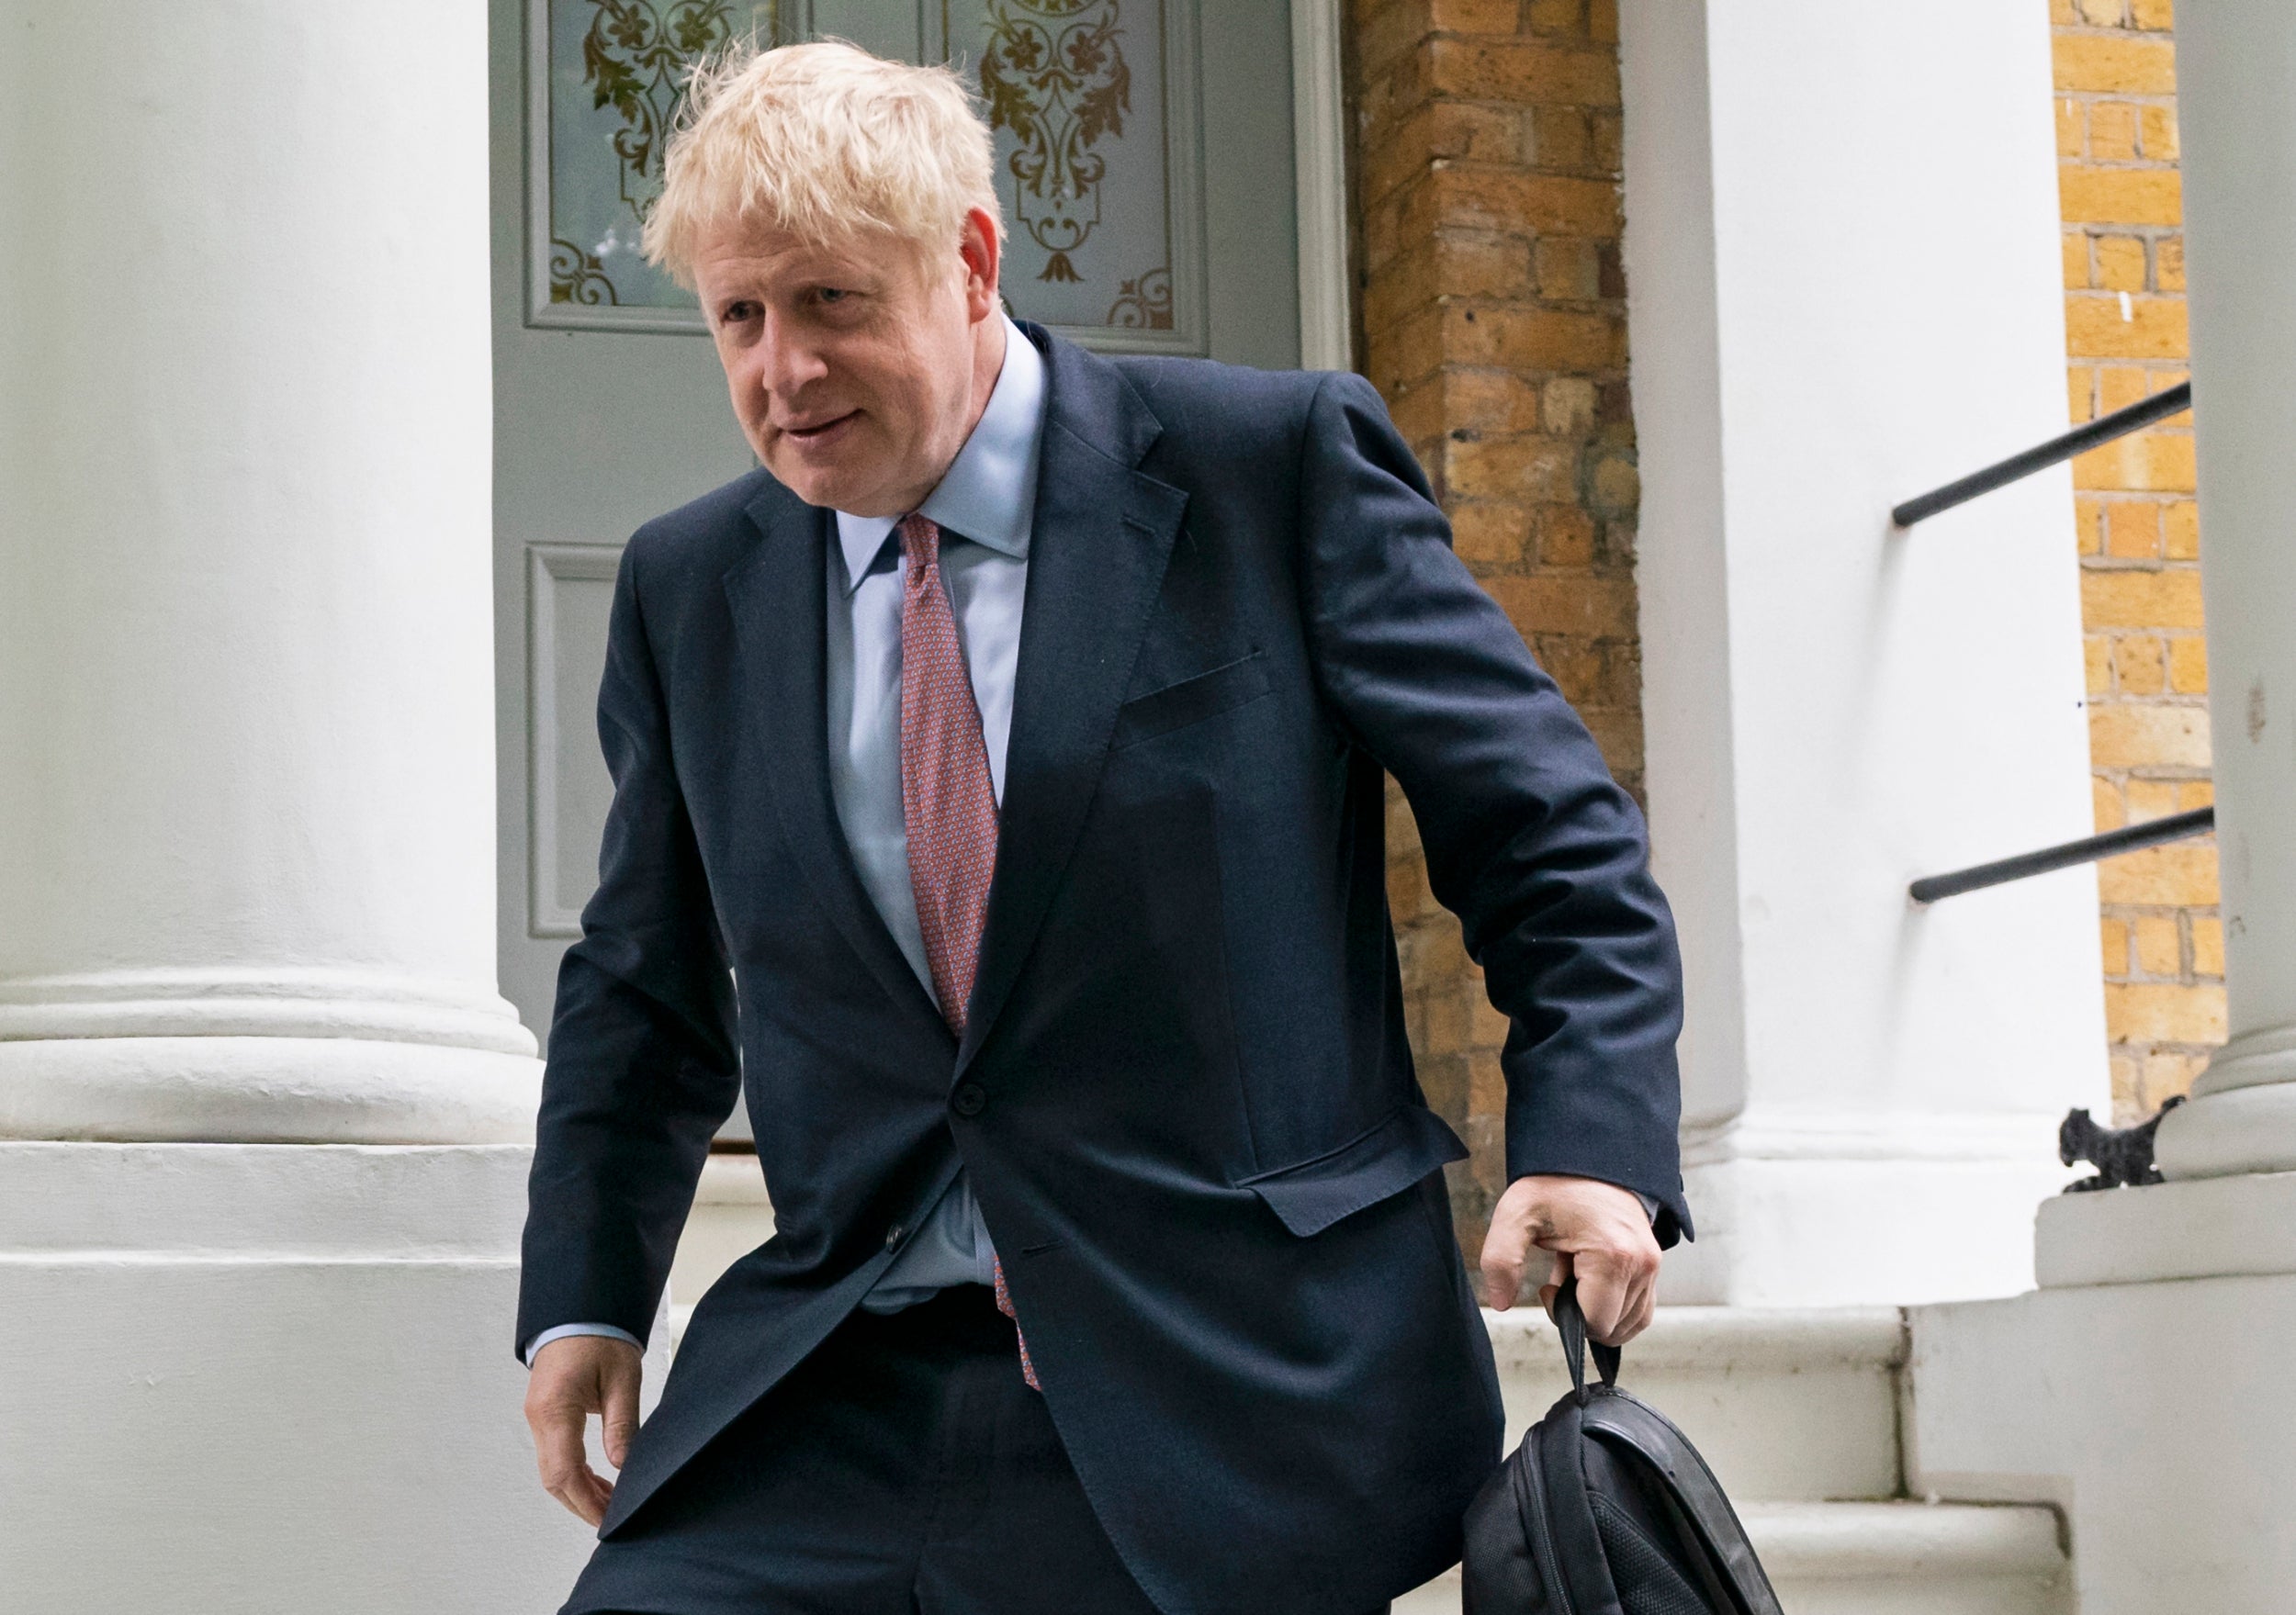 There's one question that could scupper Boris Johnson's campaign – which is why he's ducking the debate